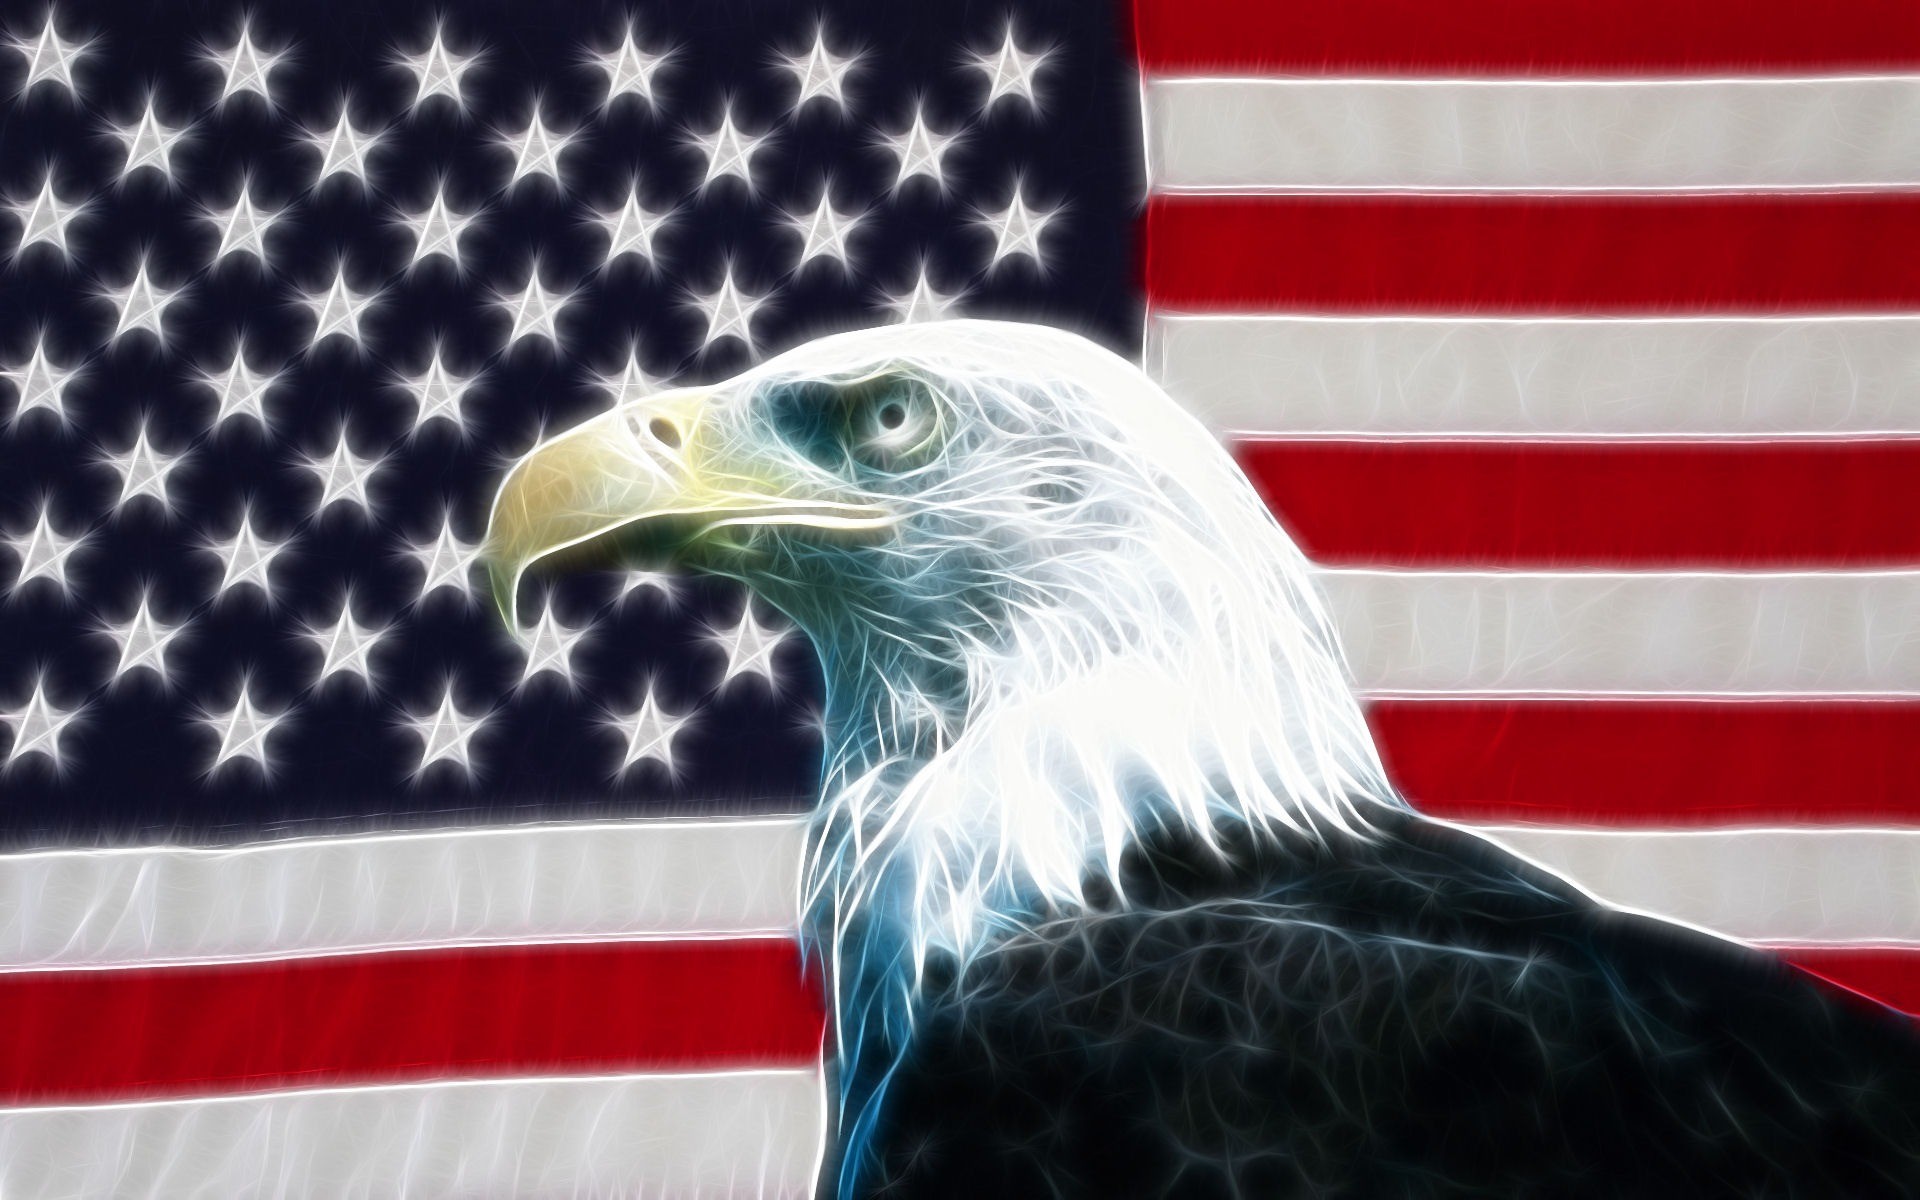 American Flag Eagle Cell Phone Wallpaper Pinterest American flag eagle and Wallpaper backgrounds